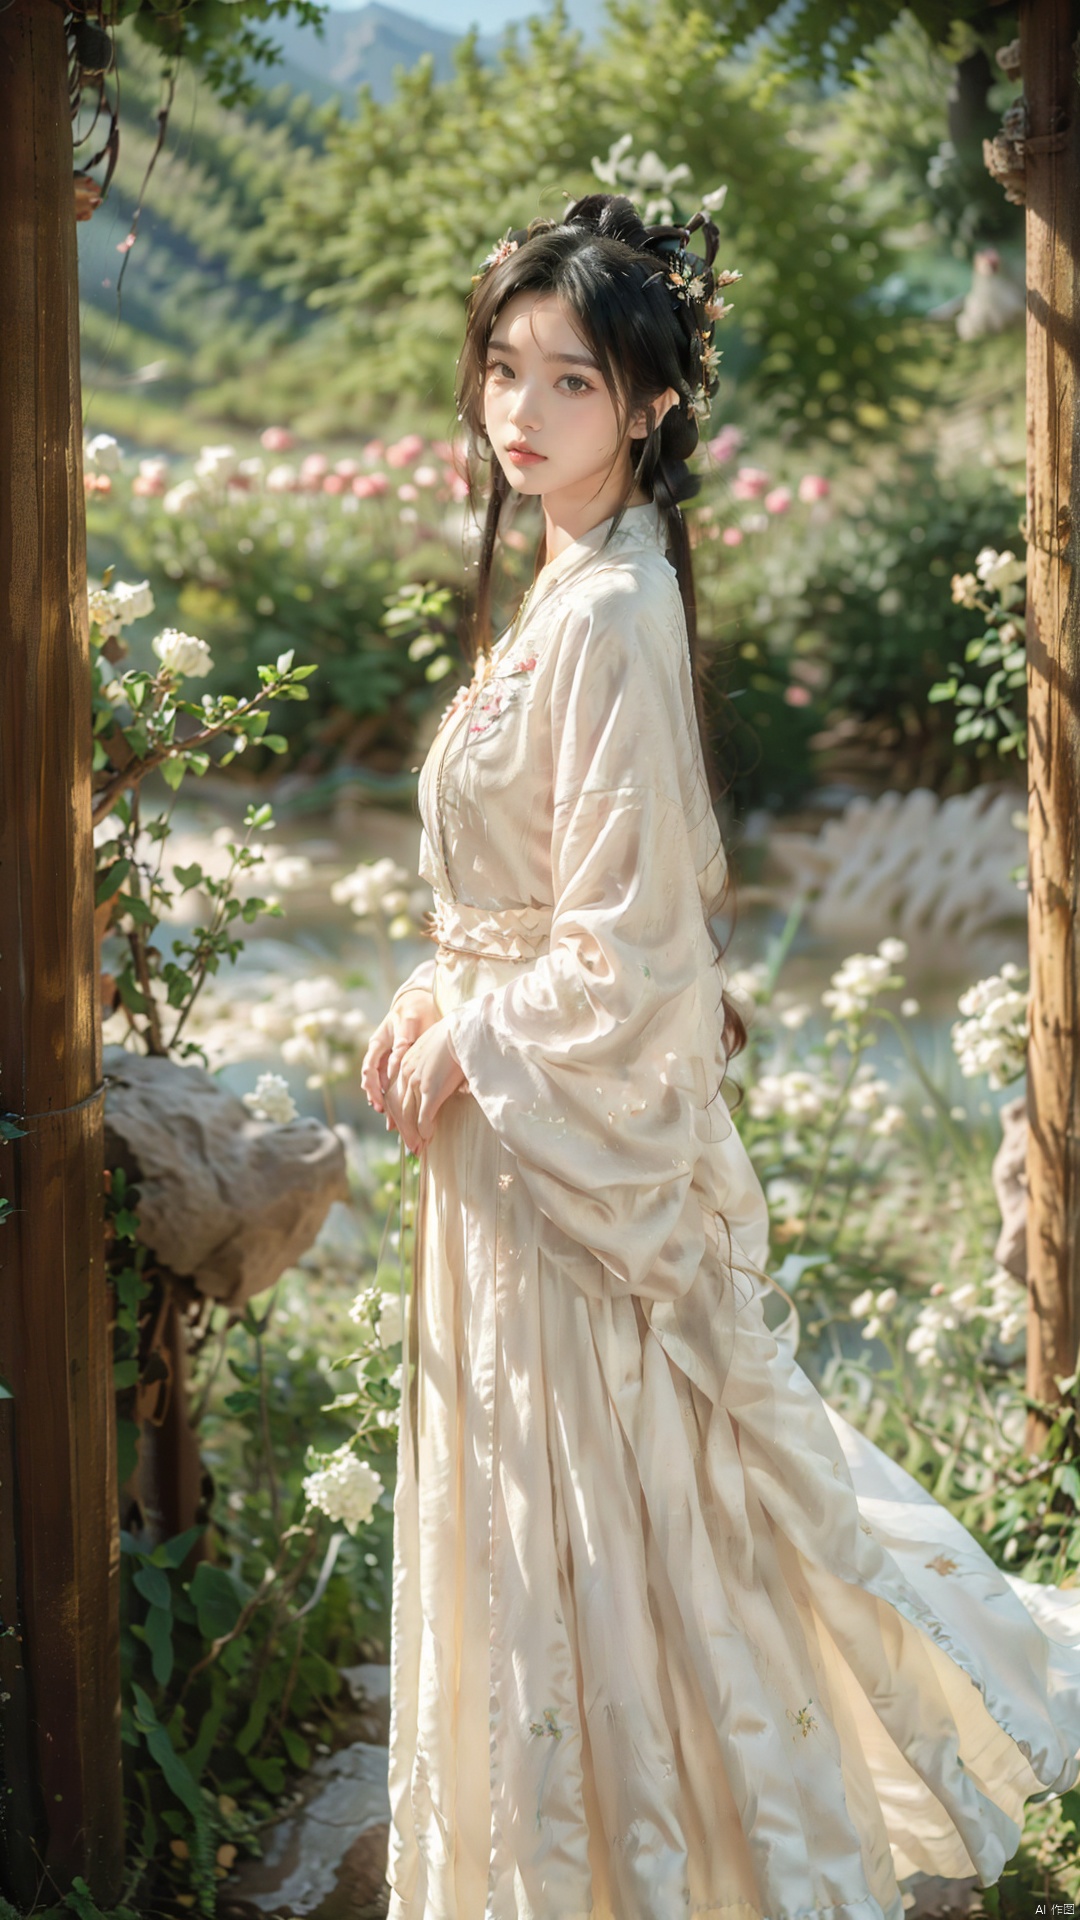  (8k, original image, best quality, masterpiece: 1.2),aerial garden, (A girl lazily stood on a rock watching the scenery),(Beautiful facial features, extremely beautiful face),(Hanfu long skirt:1.2),White Hanfu,The ancient tea trees on both sides of her are covered in white flowers,(Fisheye view), whole body, solo, atmospheric lighting, Ancient Chinese Architecture,The foreground is a Chinese style circular arch,Far away is a mountain hidden in the clouds,White flowers, wind,cloud, atmospheric lighting,physics based rendering, viewers,DUNHUANG_CLOTHS,han style,1 girl